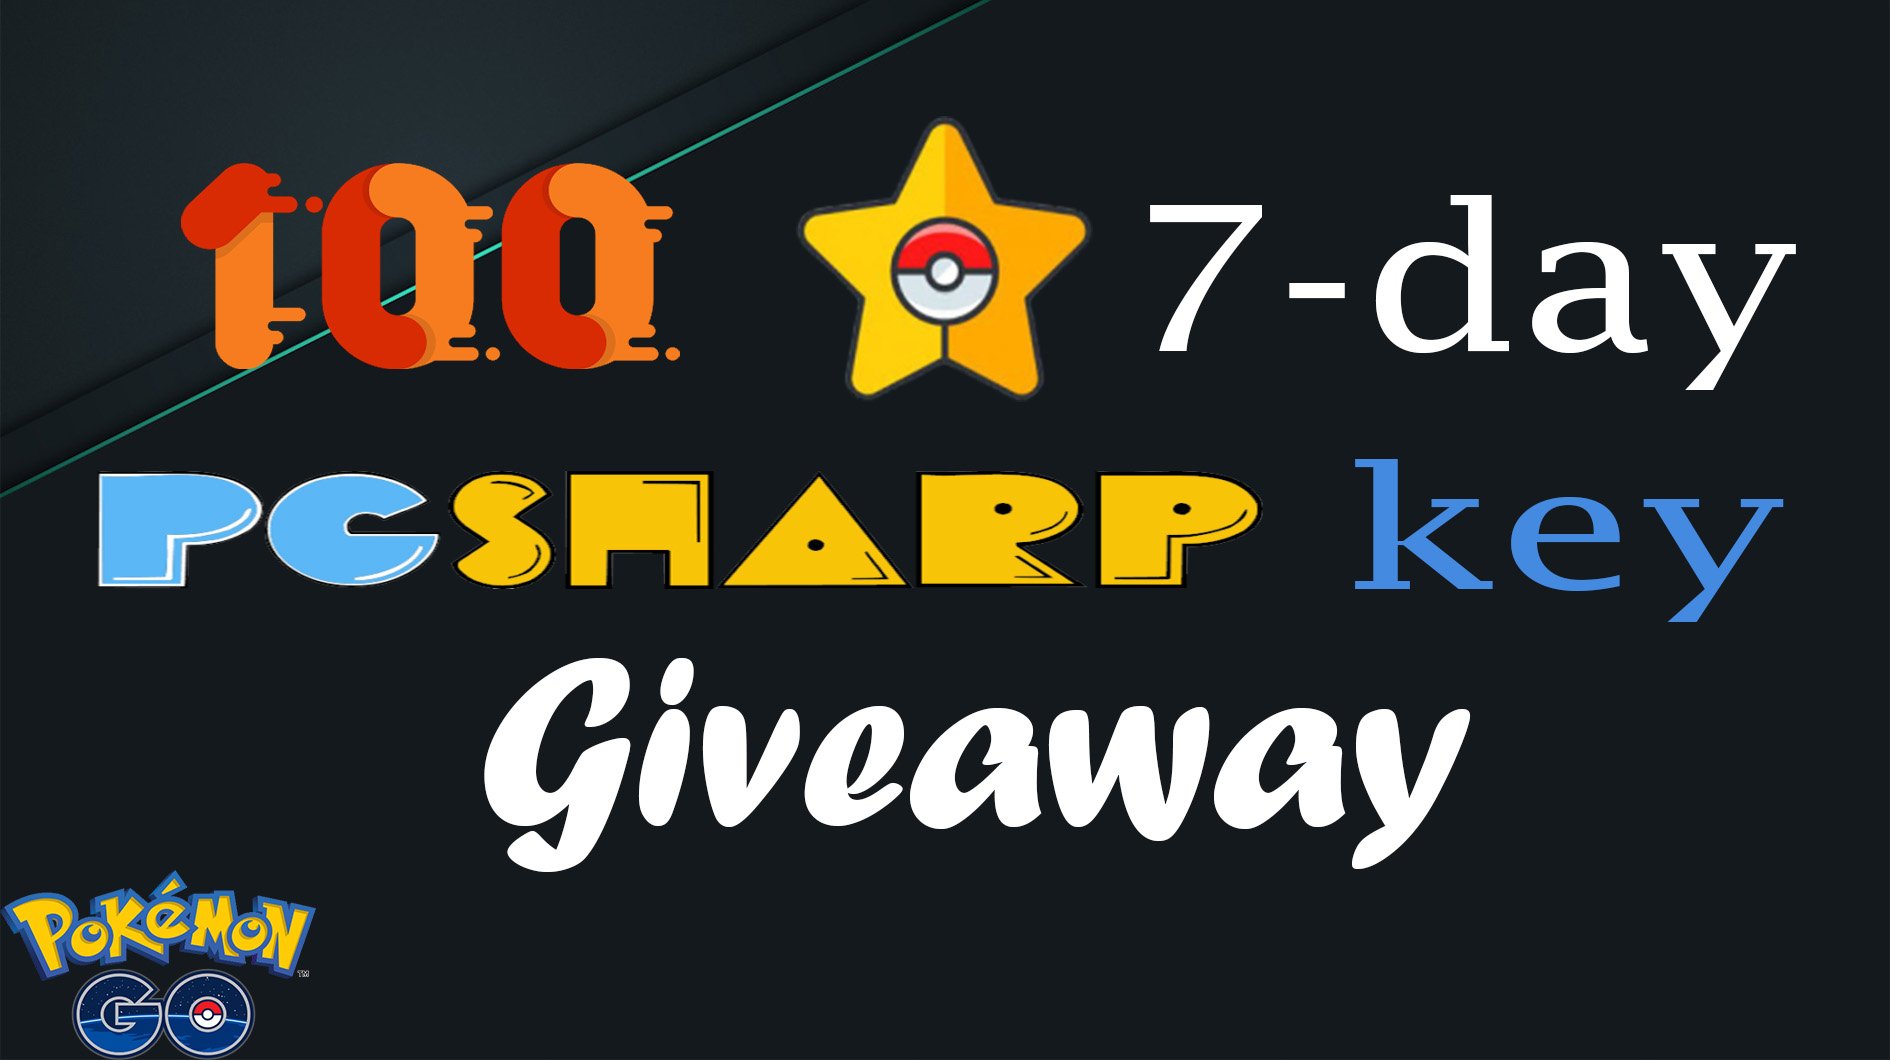 100 Pgsharp Keys Giveaway By Spoofers Unite 4 Keys In Every 10minuts All Keys Will Be Valid Till 19 9 To Participate In This Giveaway Join Us Ziac007 And